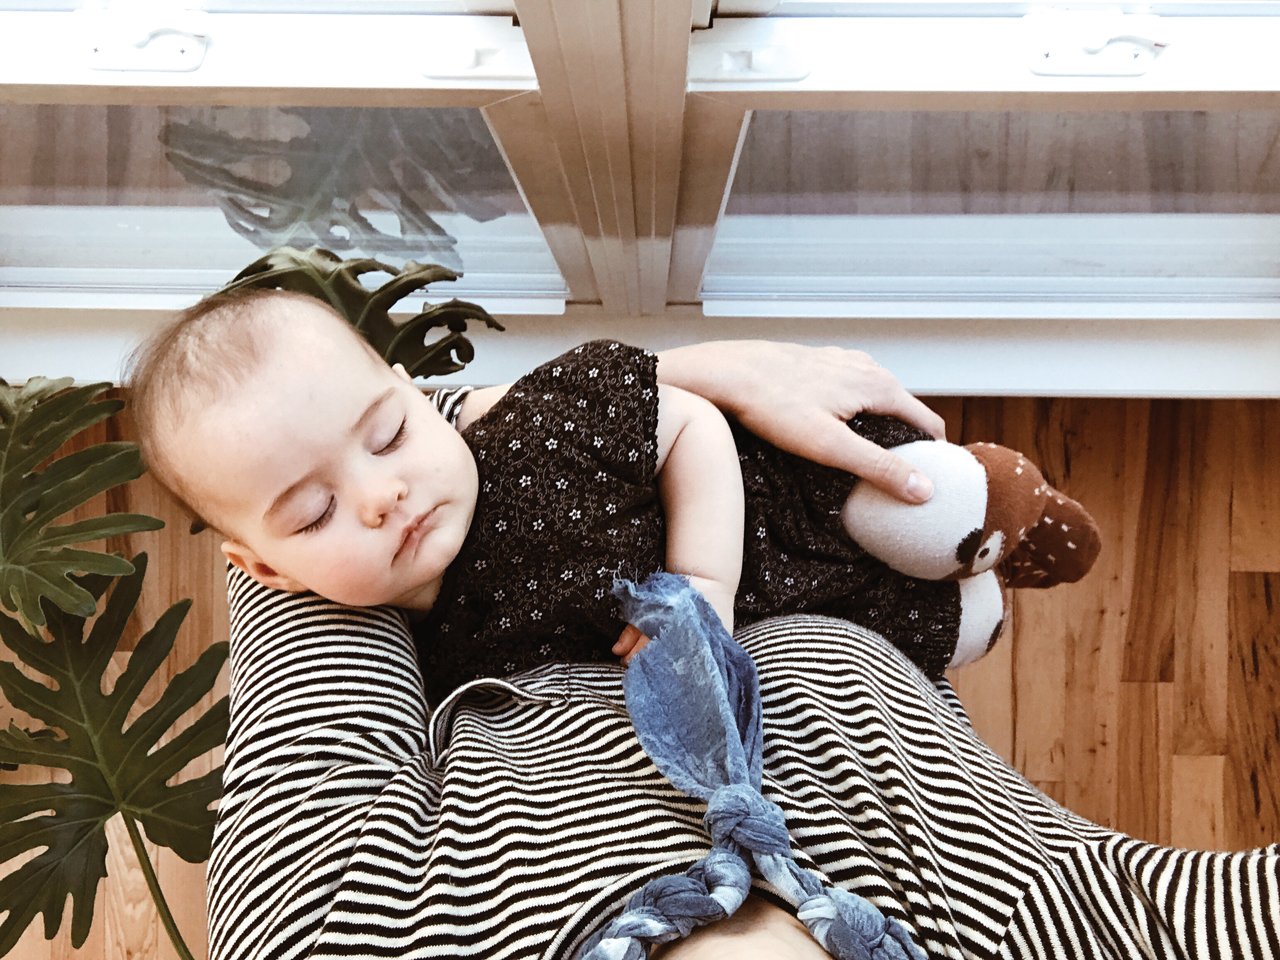 Yes! Sometimes it’s OK to wake a baby from a nap